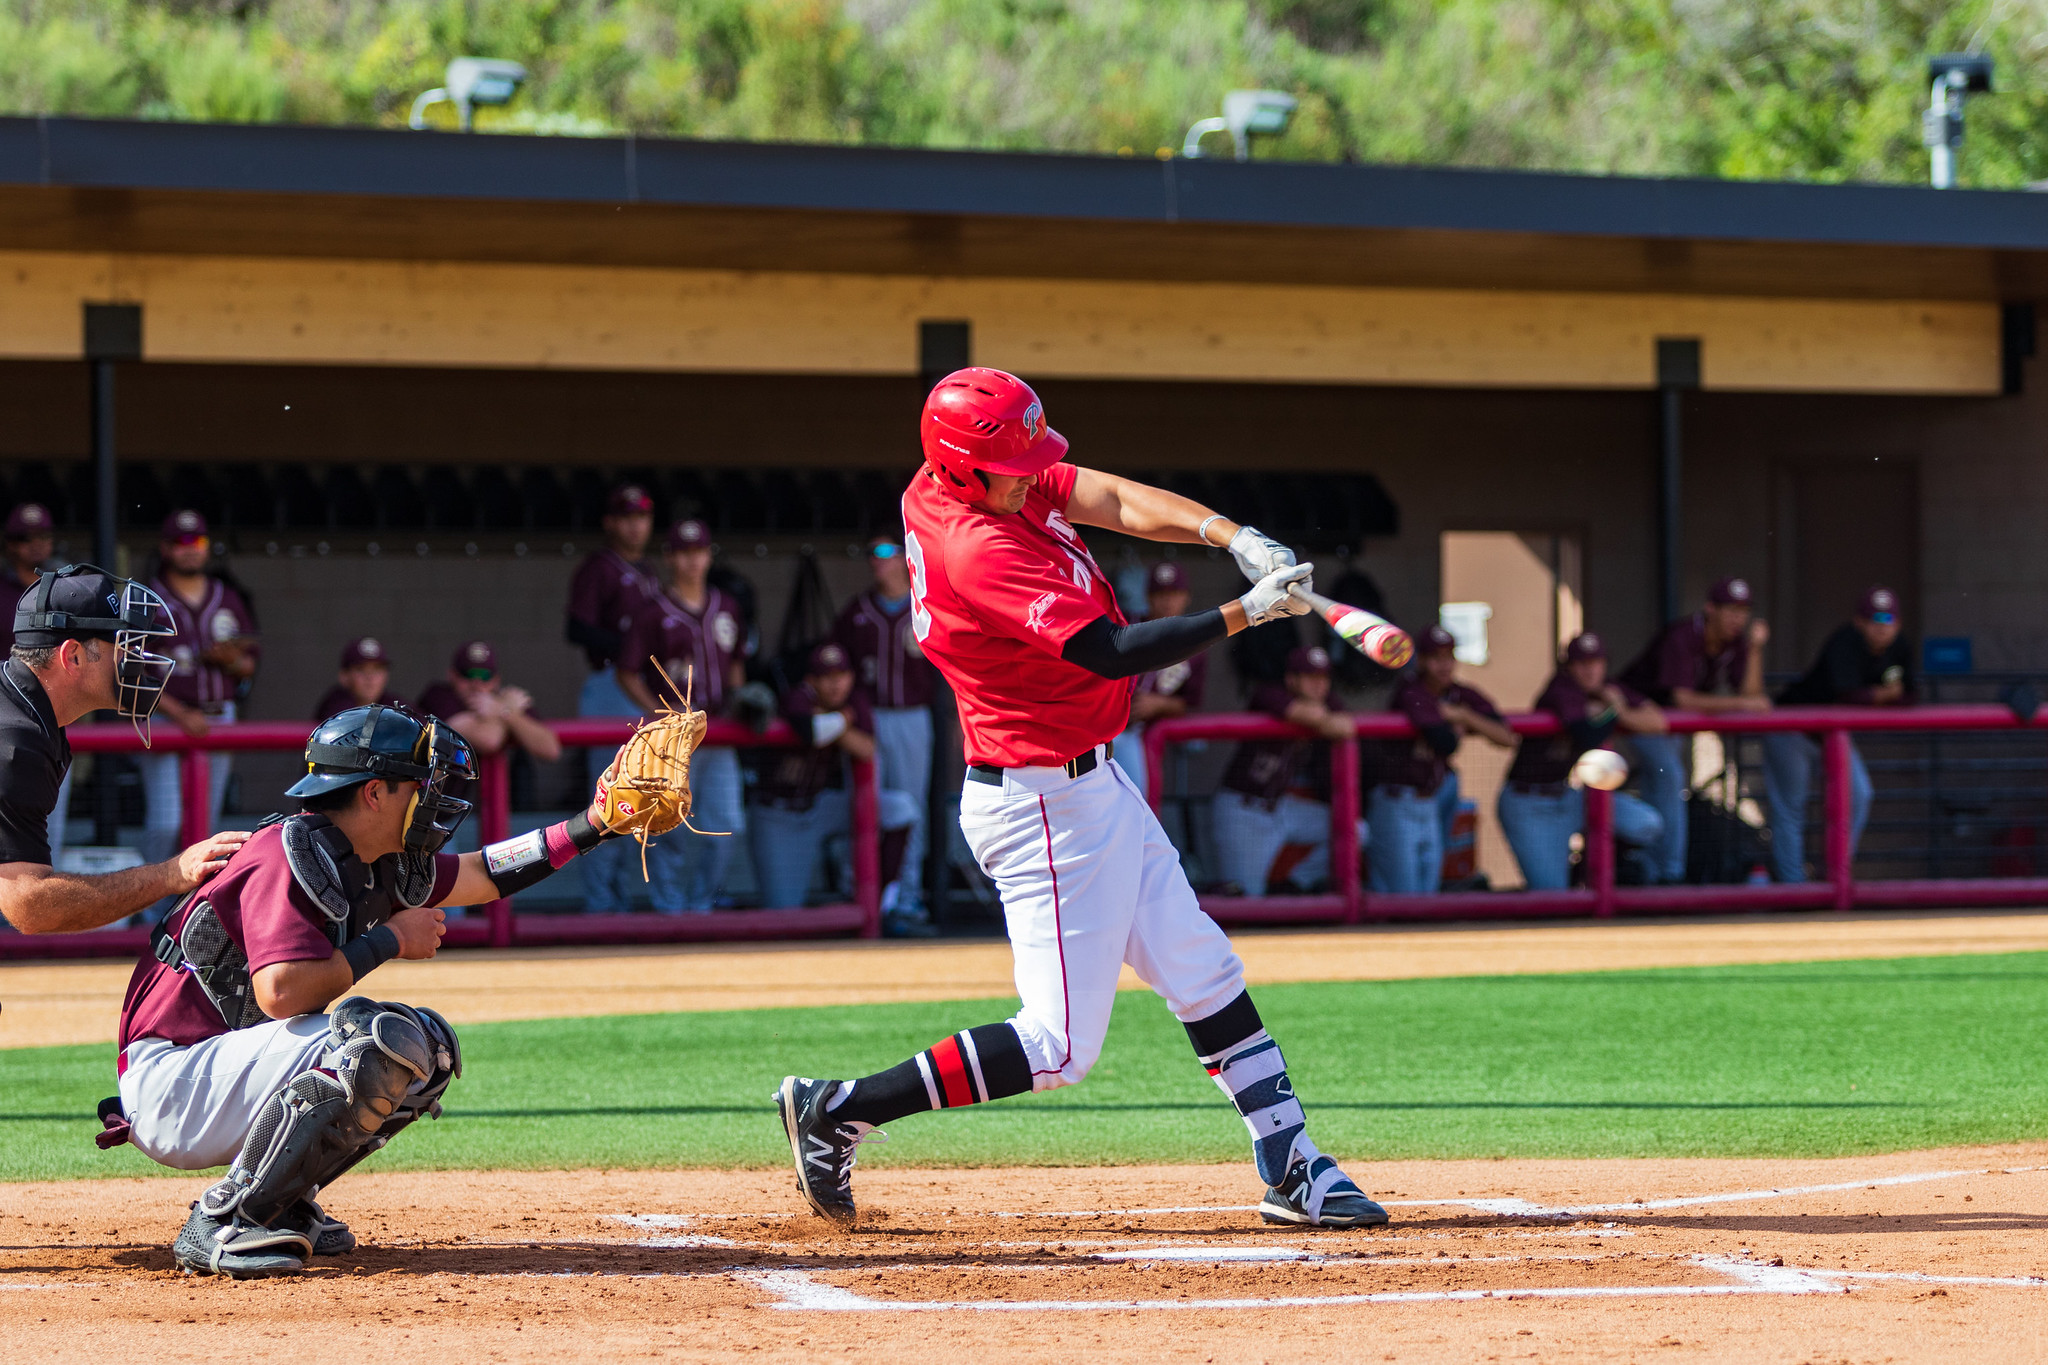 A male Palomar baseball player wearing a red jersey and white pants swings a baseball bat. A catcher squats behind him with his mitted left hand raised, while an umpire watches from behind. More than a dozen opposing team players watch from the dugout (blurry).